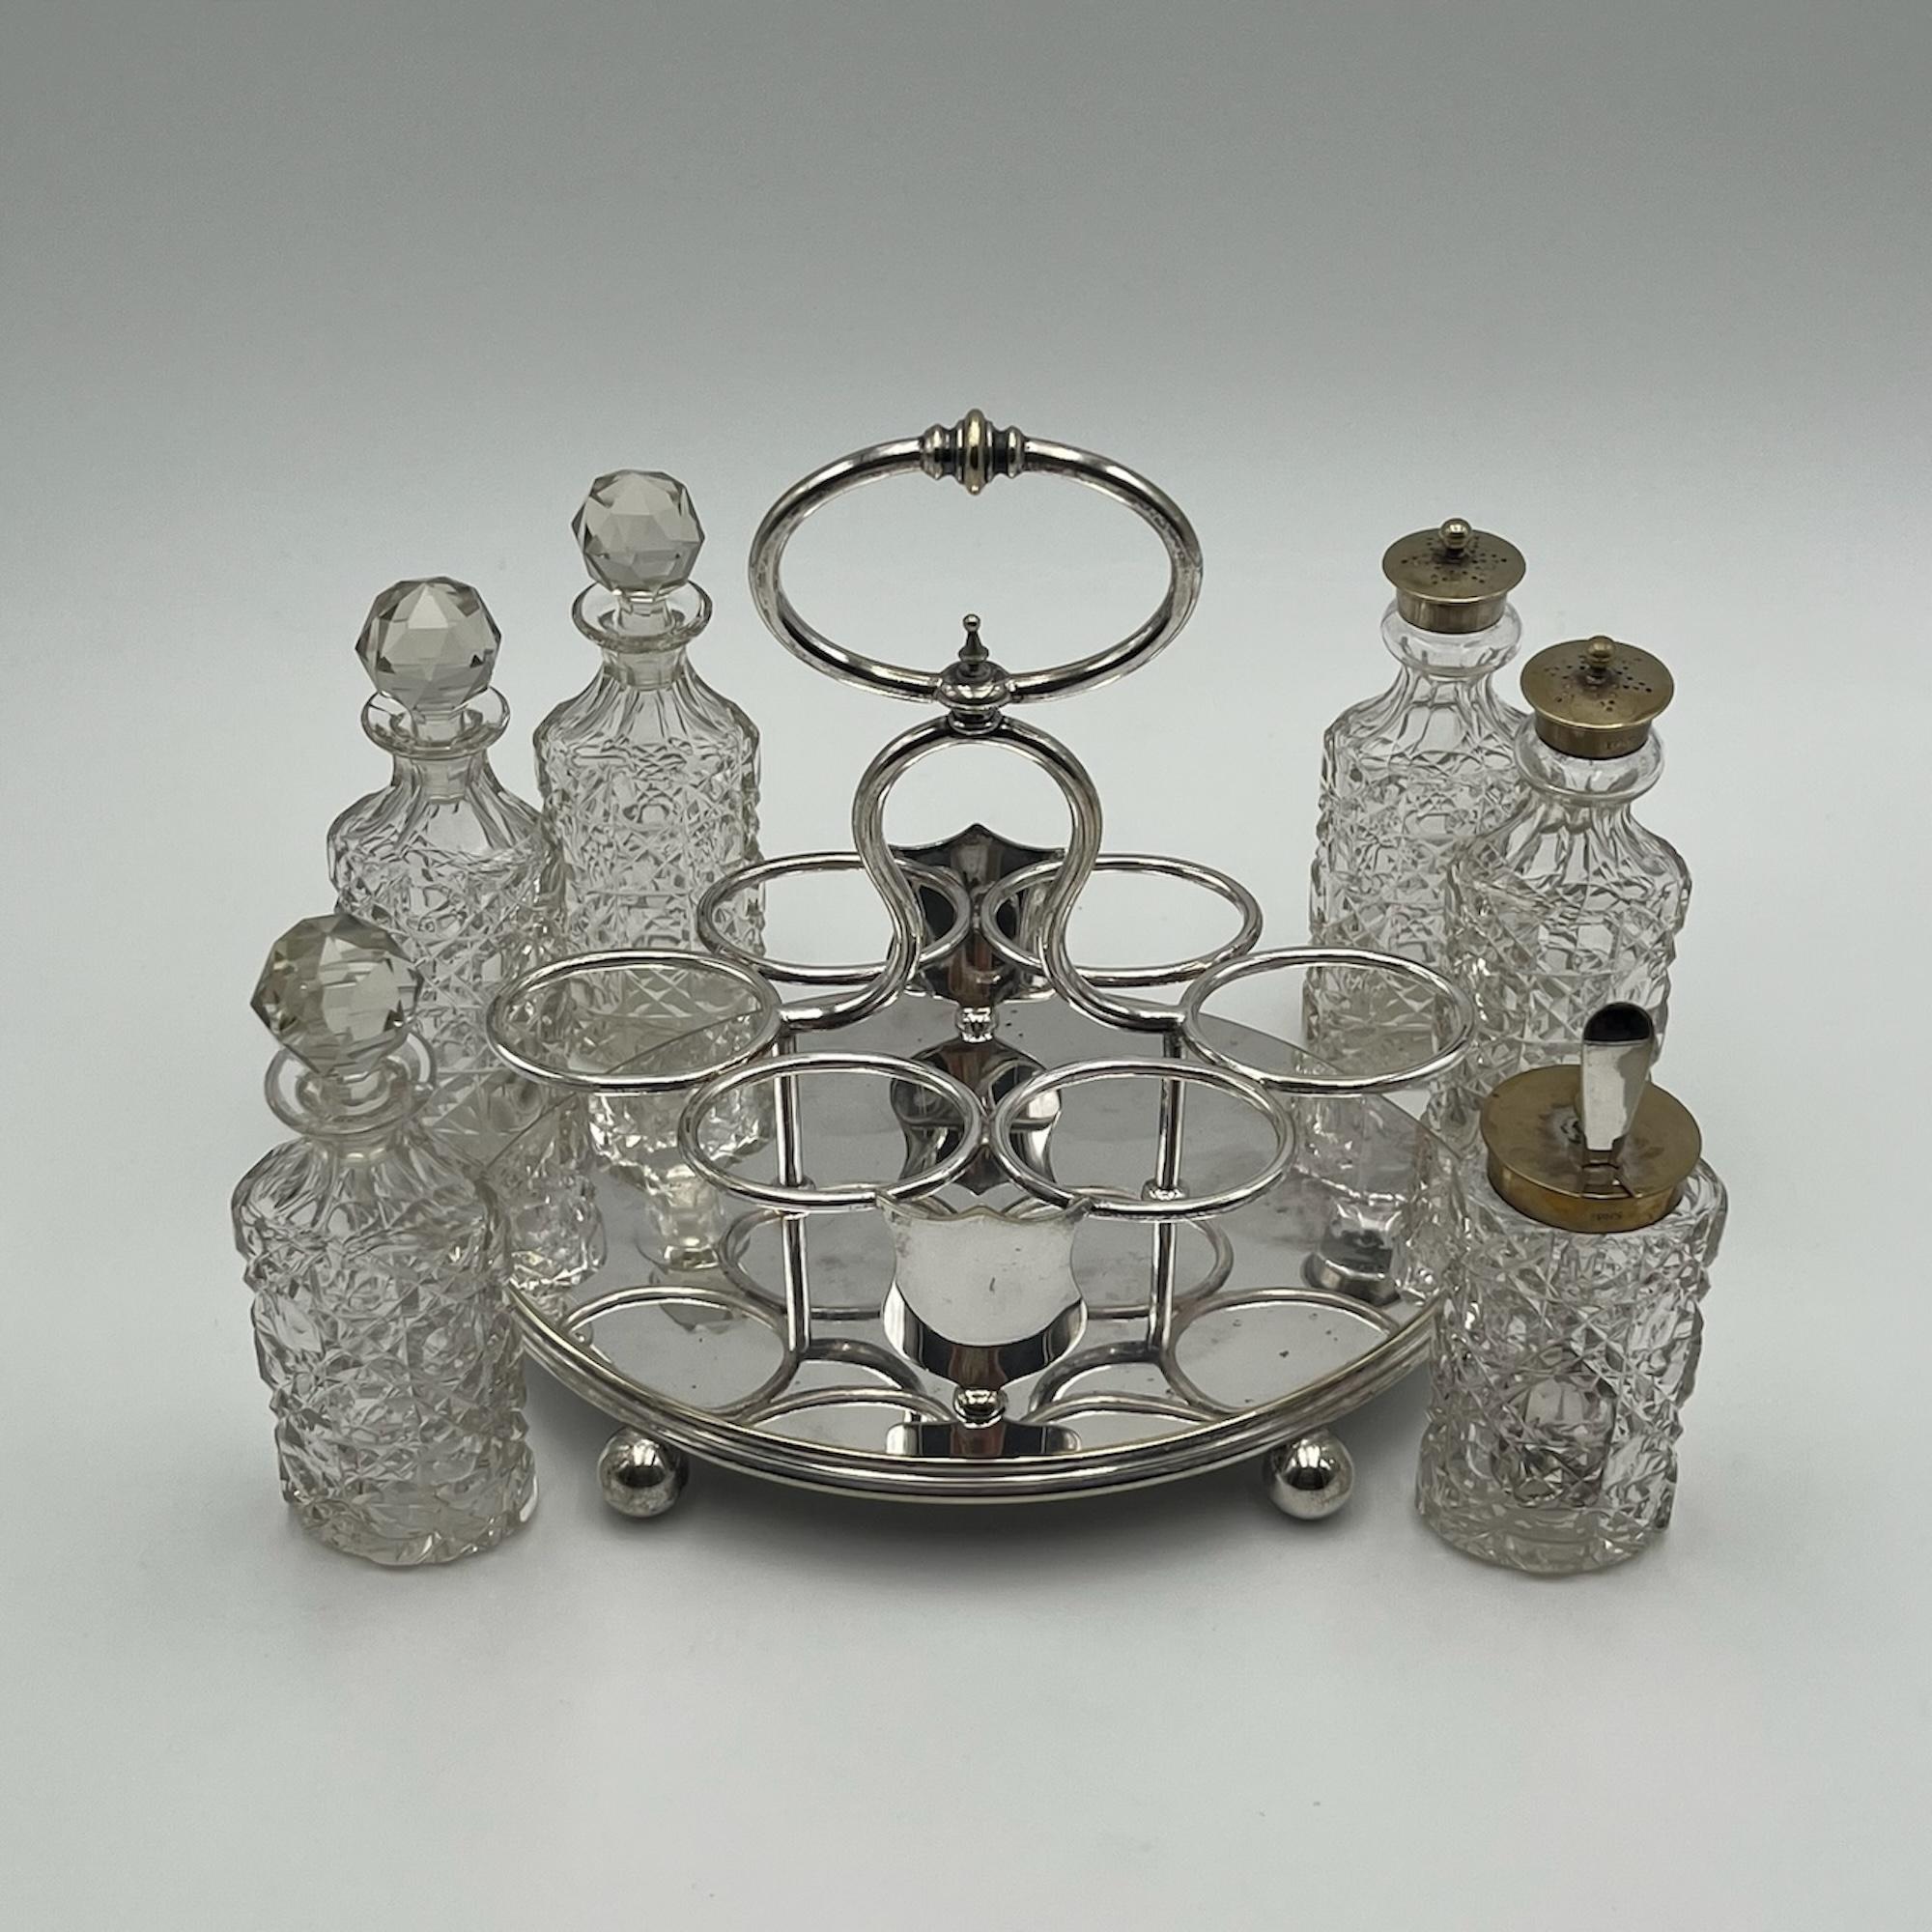 Mid-20th Century Rare 1940s Crystal Ampoule Set with Accessories - English Craftsmanship